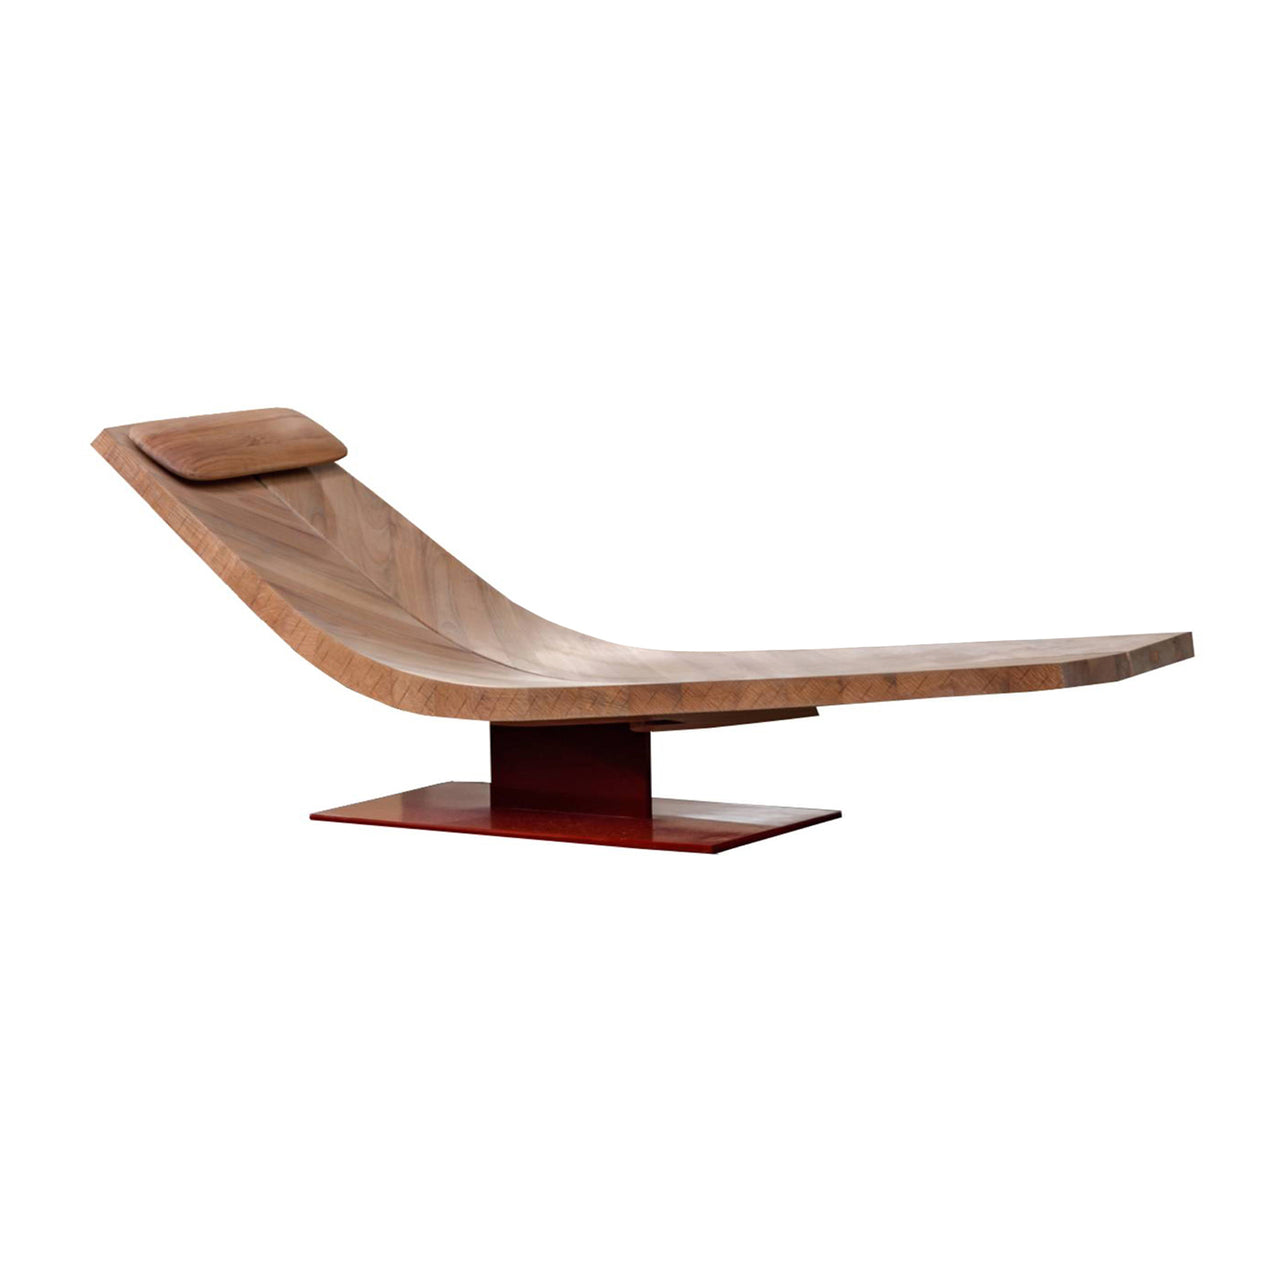 Kalia Chaise Lounge: Sculpted + Cherry Pigment + Without Cover Blanket